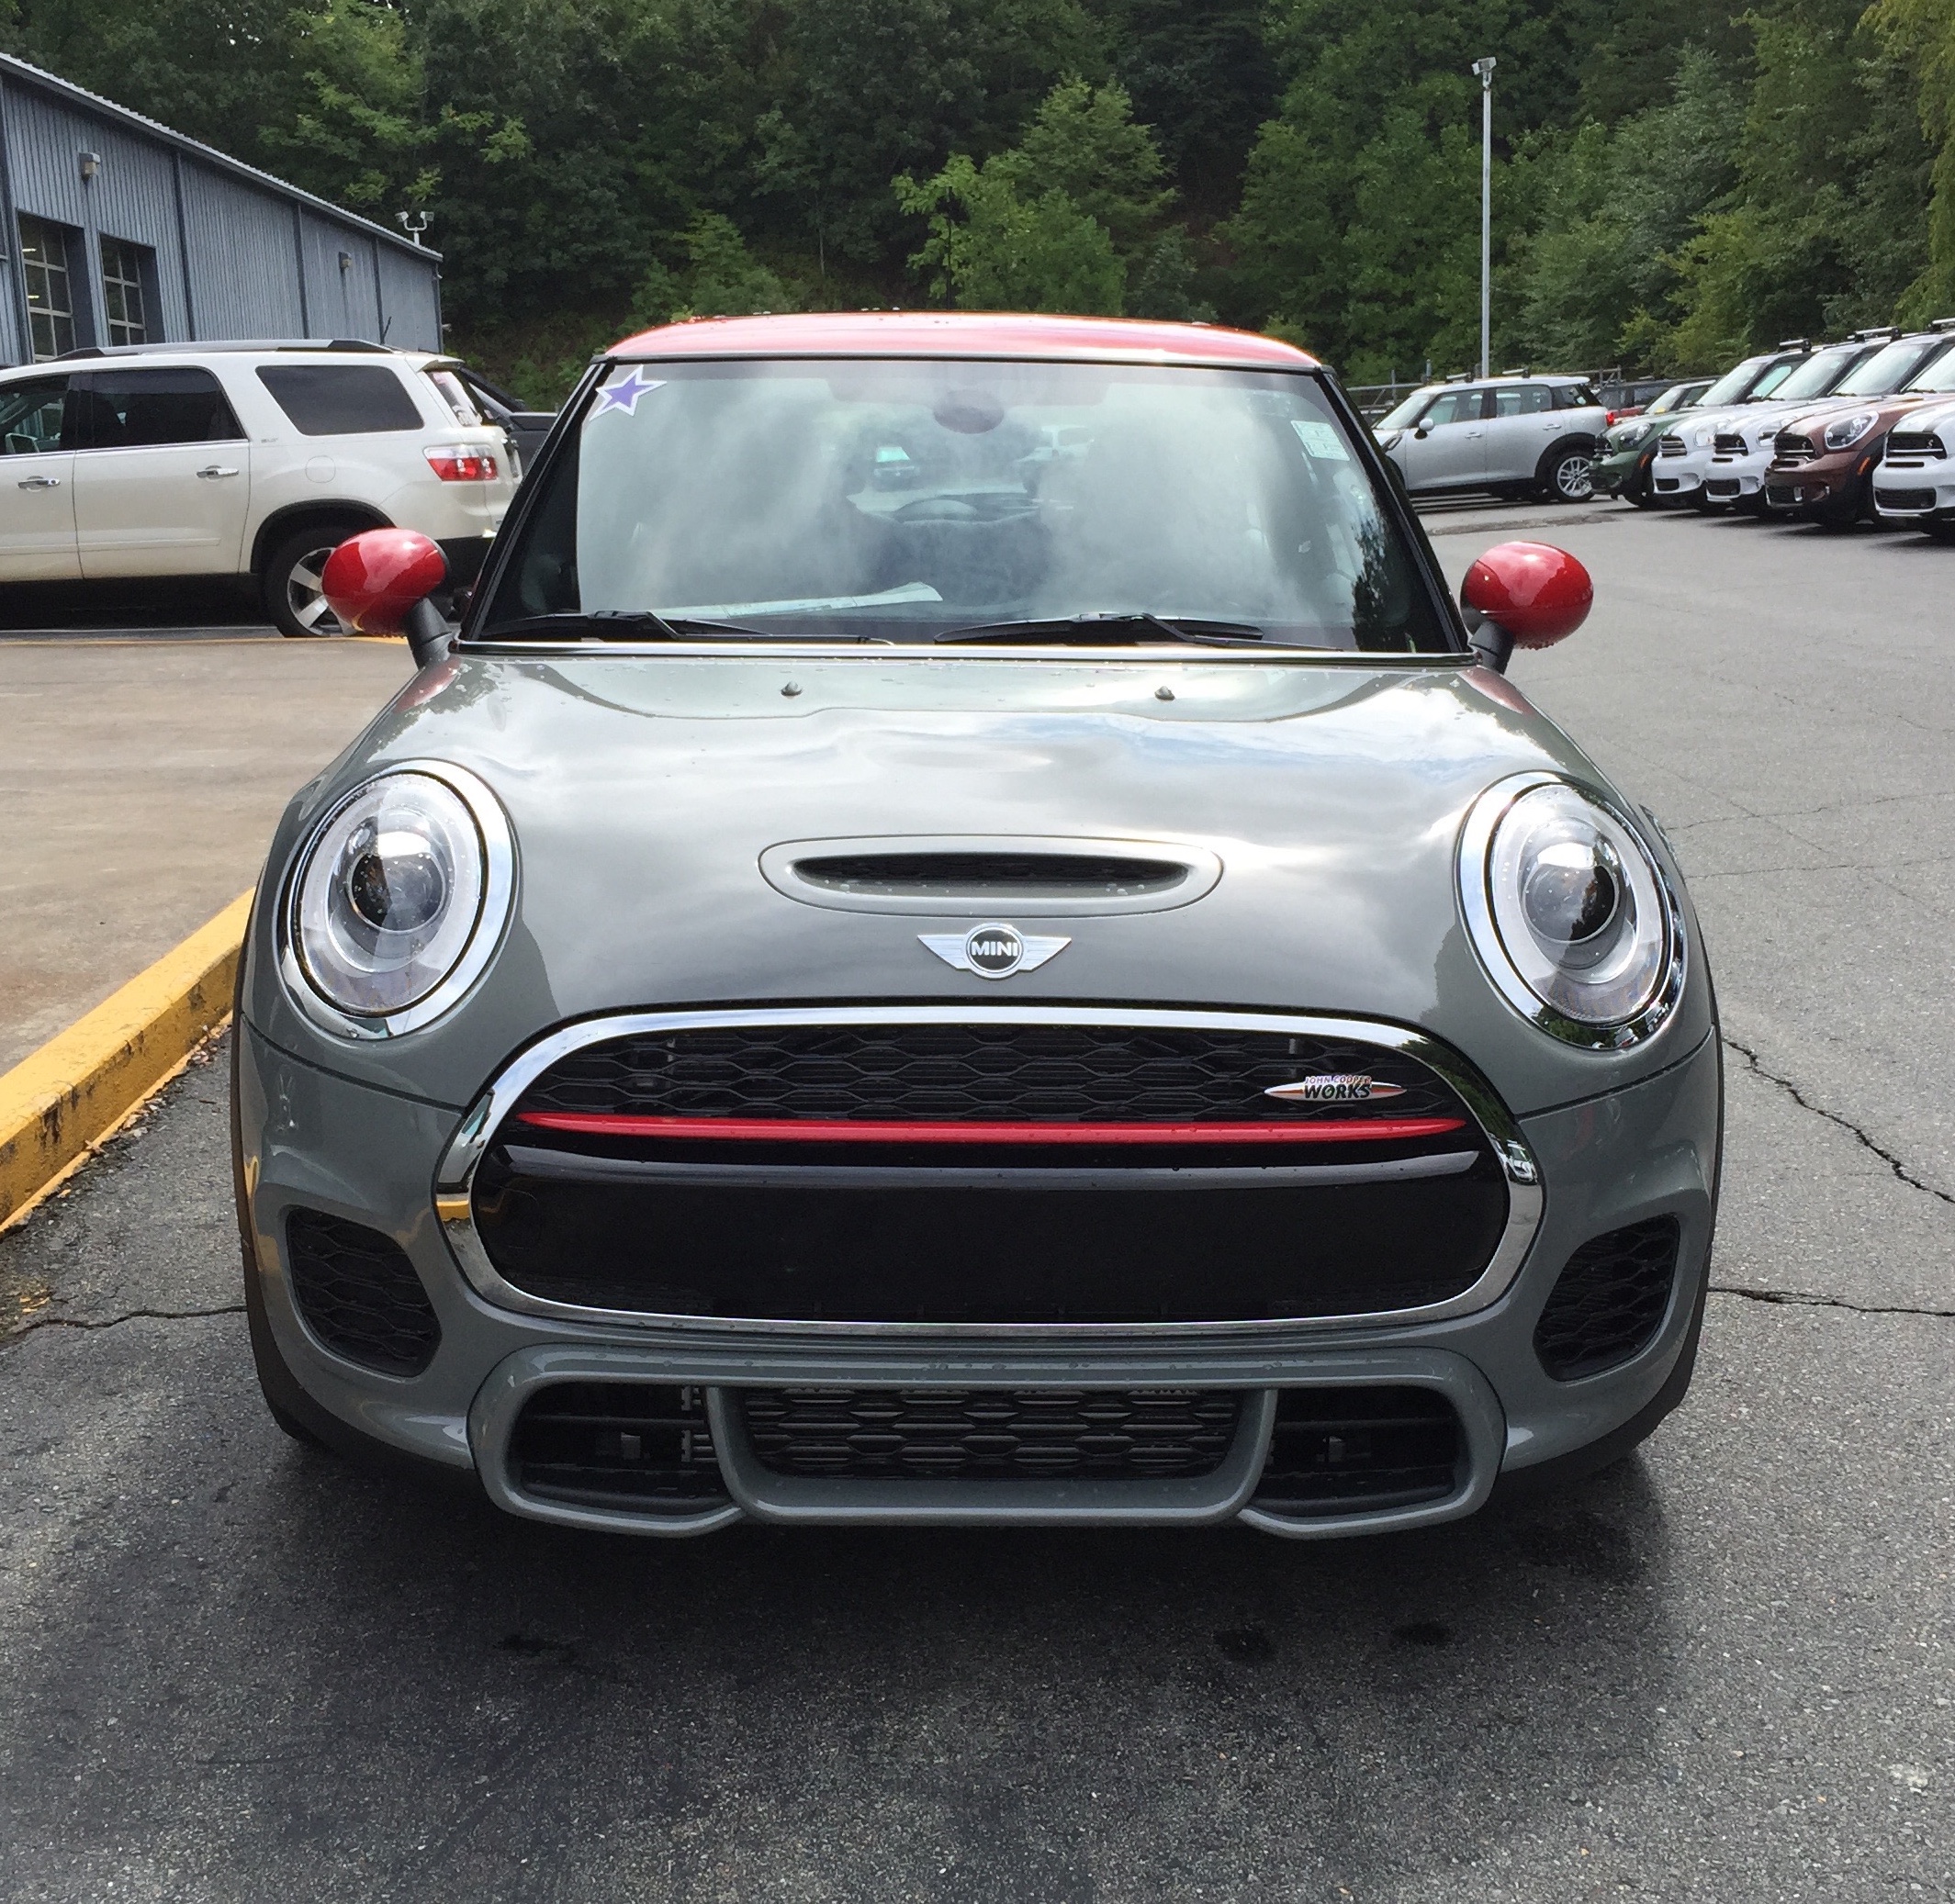 JCW JCW Pictures! - Page 2 - North American Motoring